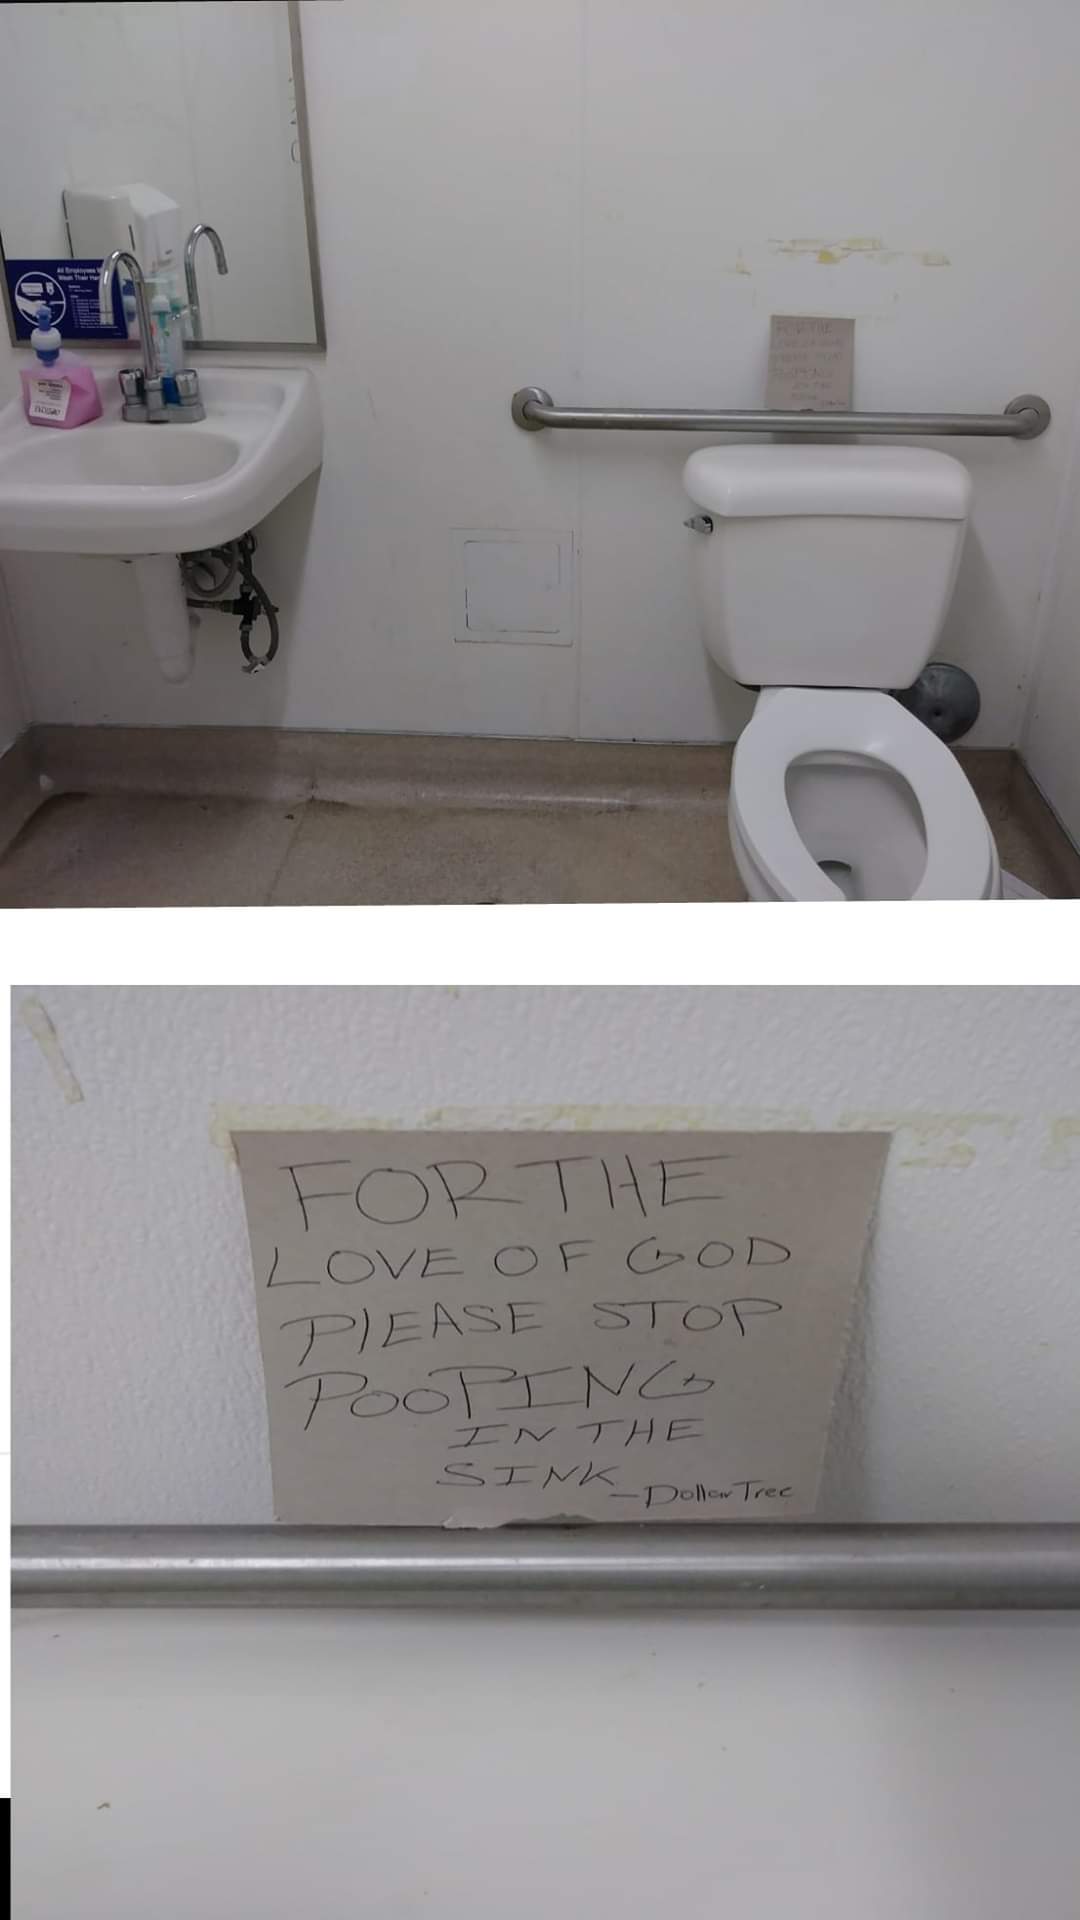 bathroom - For The Love Of God Please Stop PoolTNC In The S INK_ Dollar Tree